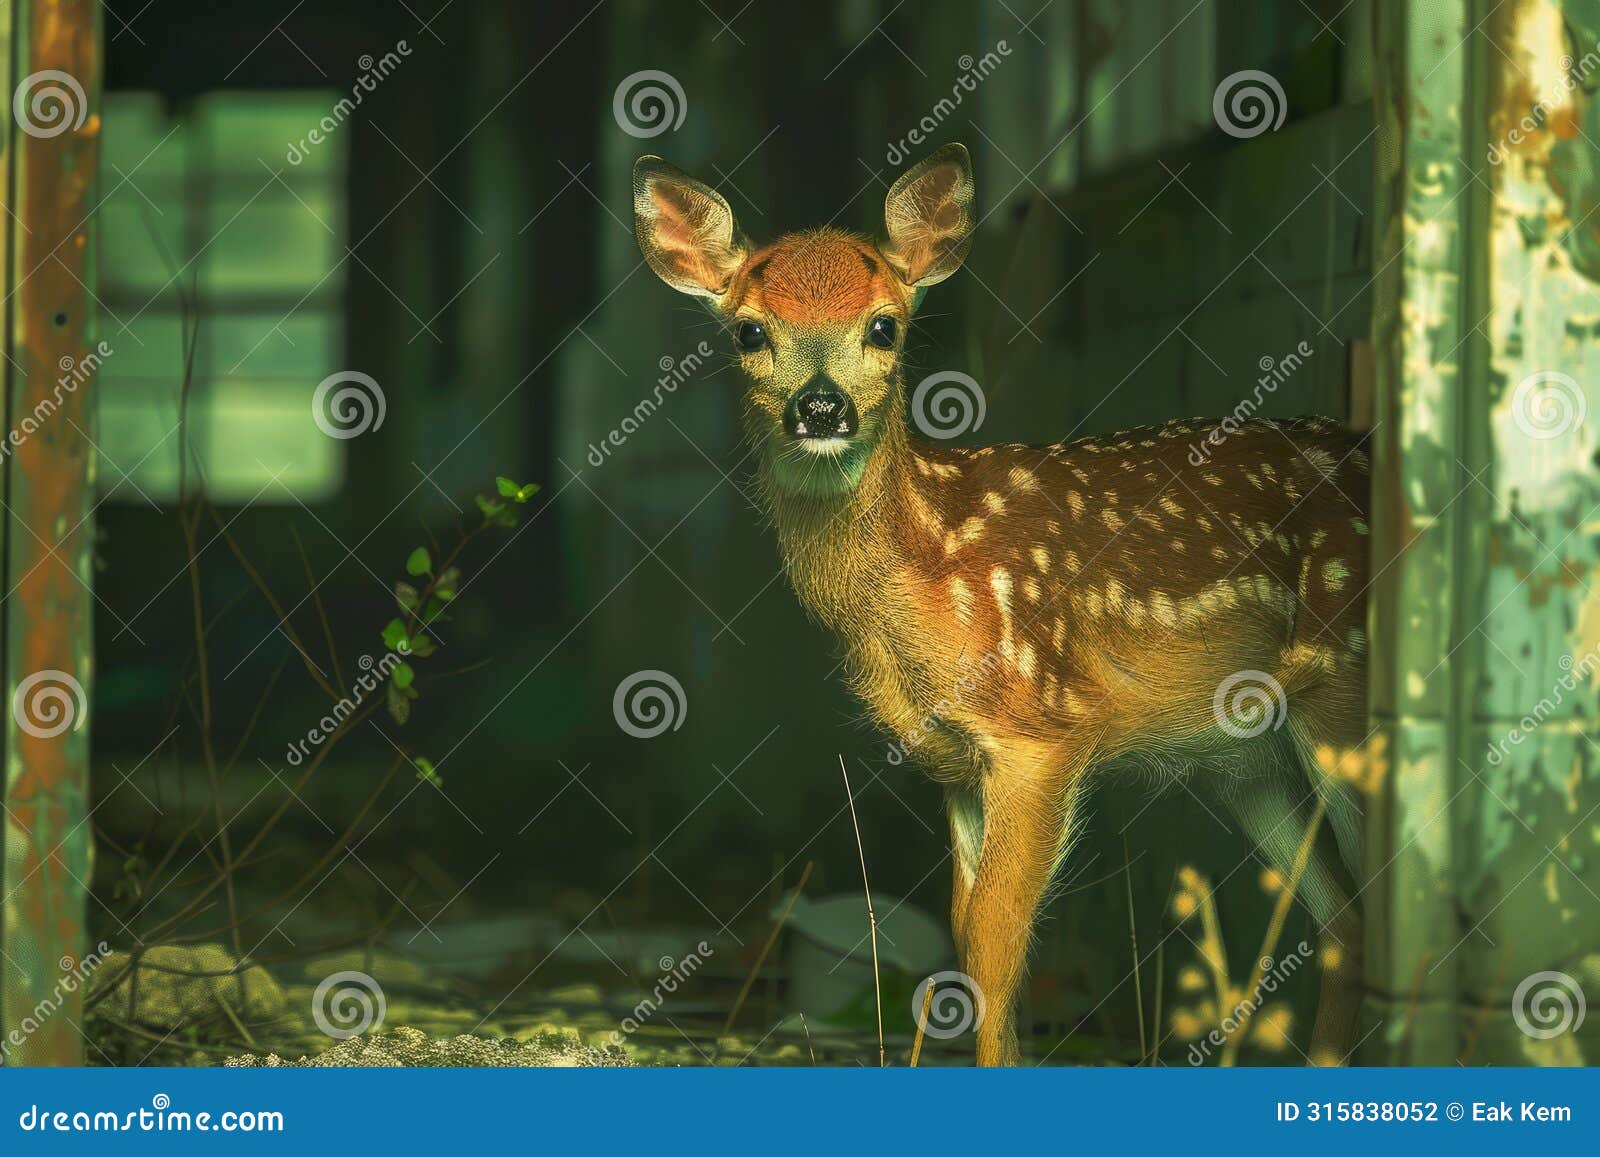 enchanting fawn standing amidst abandoned ruins at twilight, izing nature reclaiming space